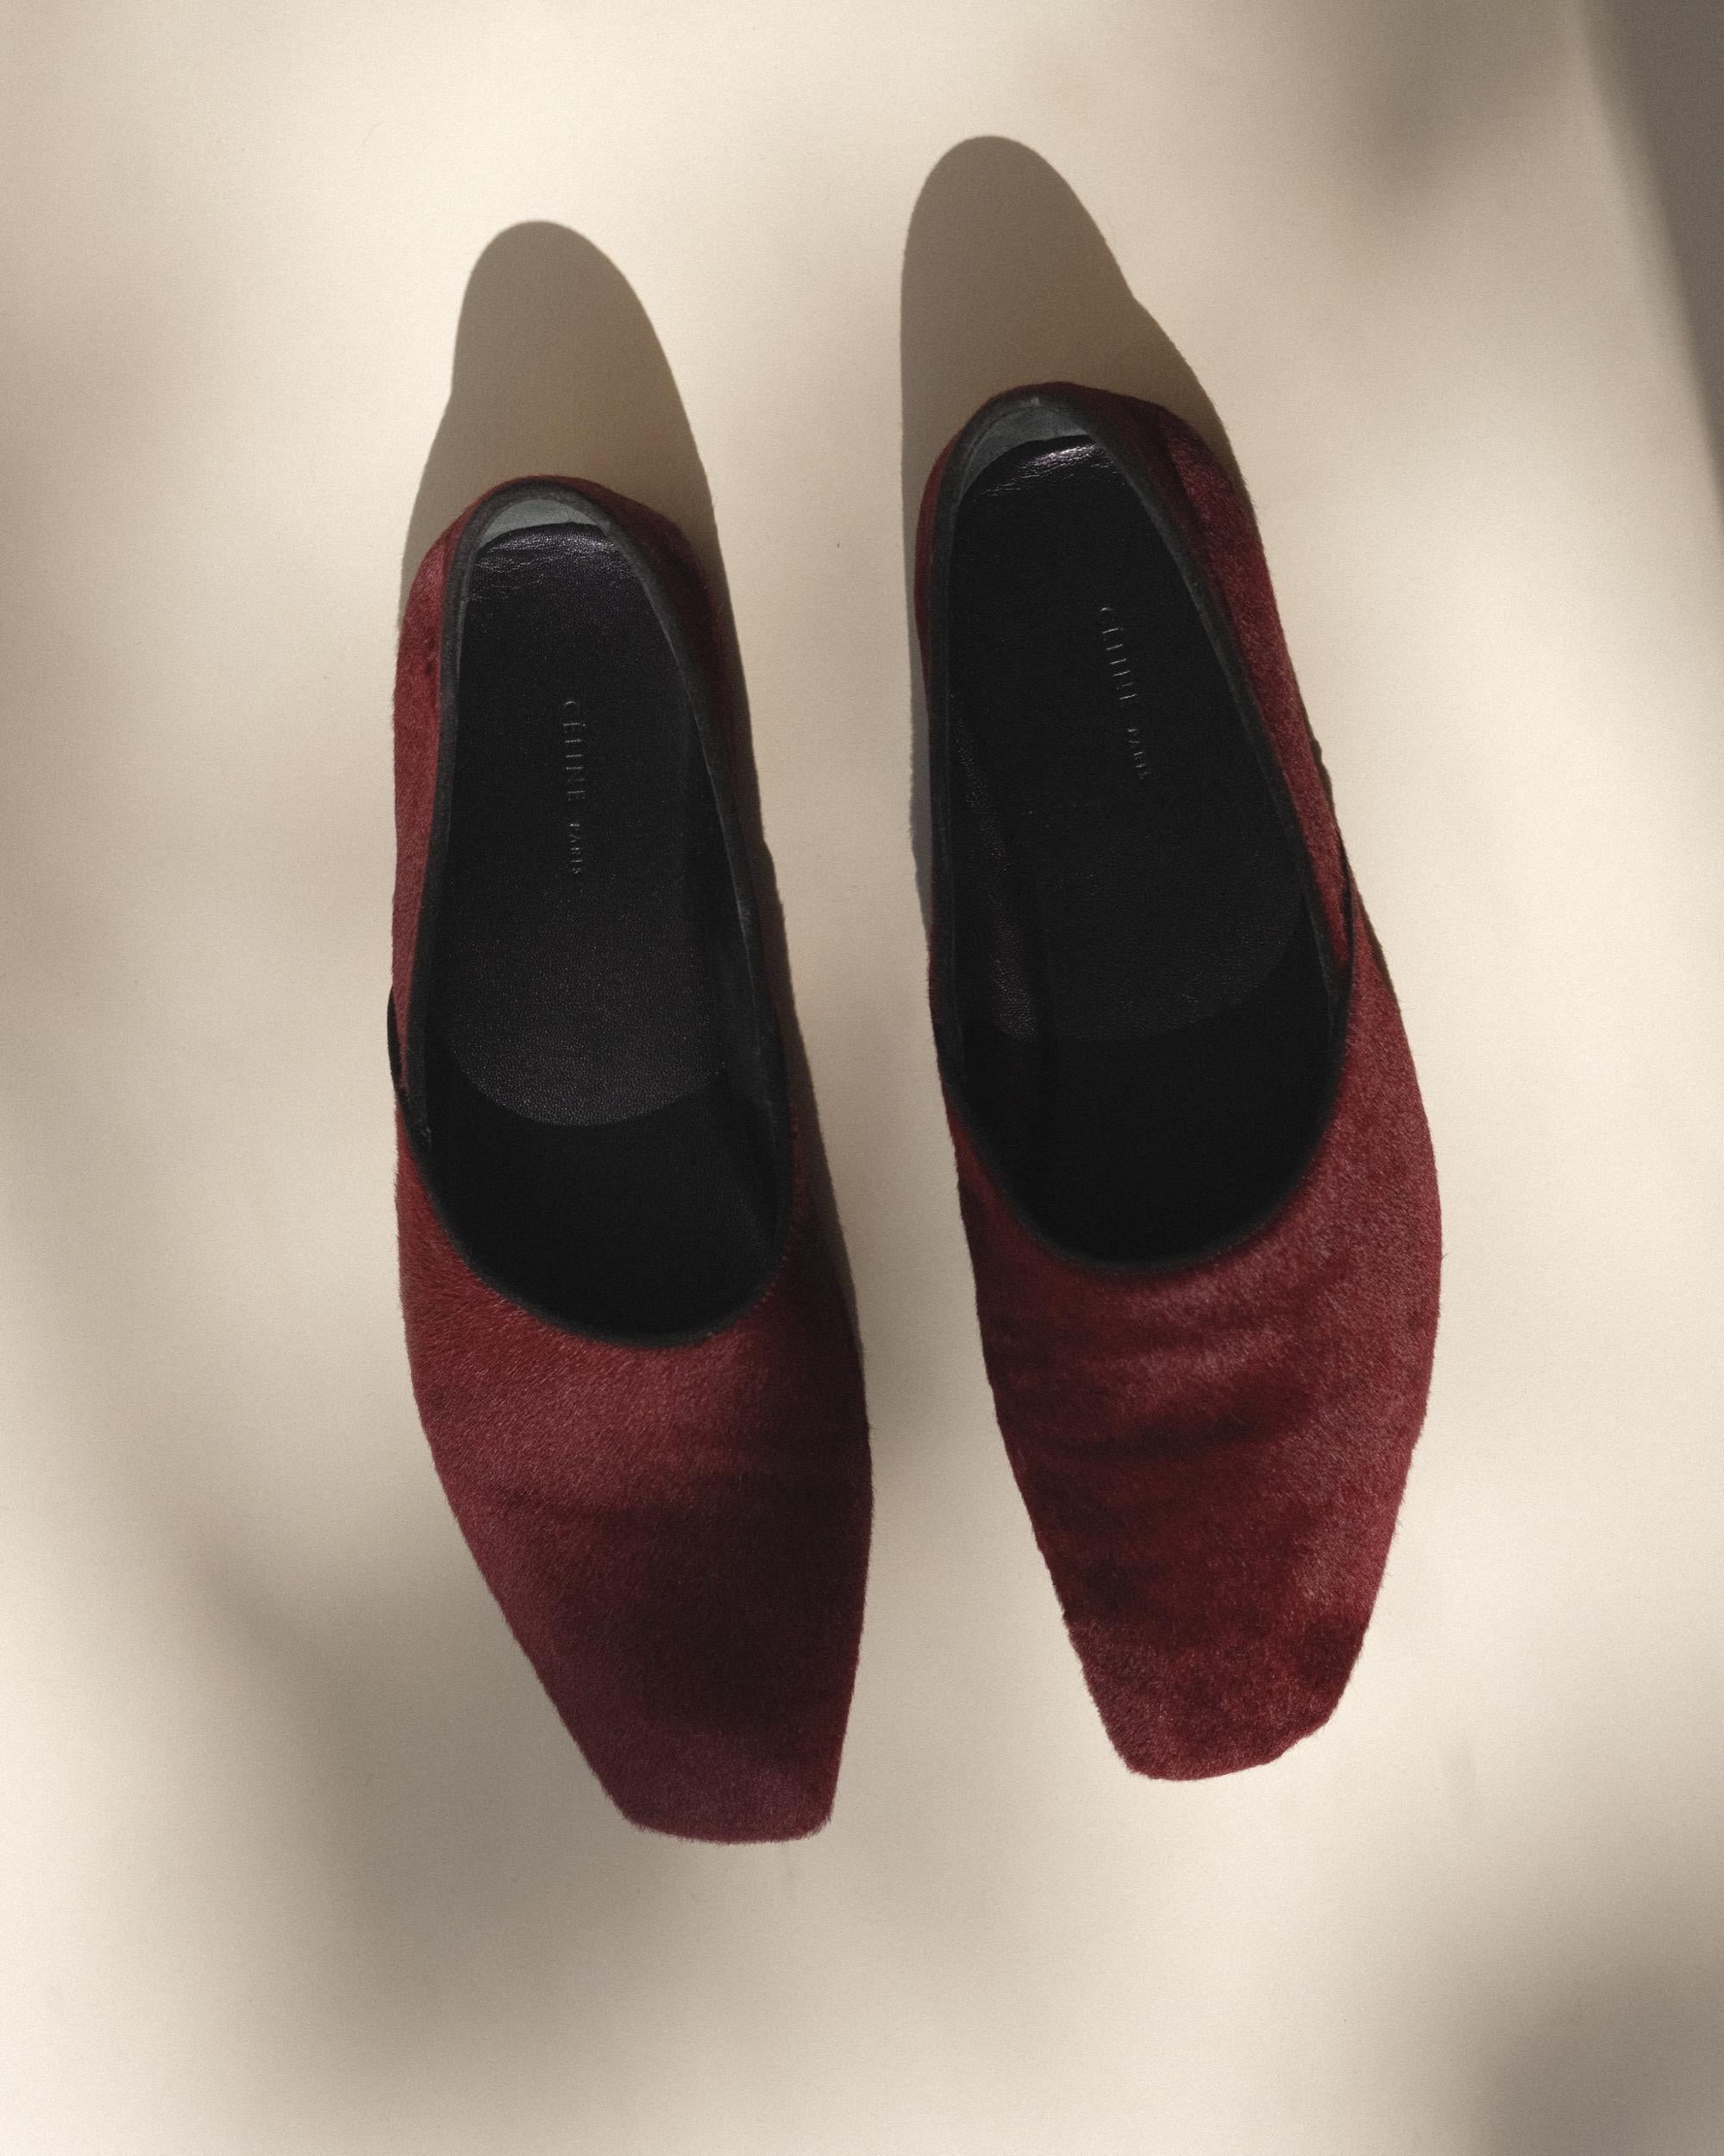 Céline Phoebe Philo Pony Hair Smoking Slippers Flat 38 Burgundy SS 2013 In Good Condition For Sale In Los Angeles, CA